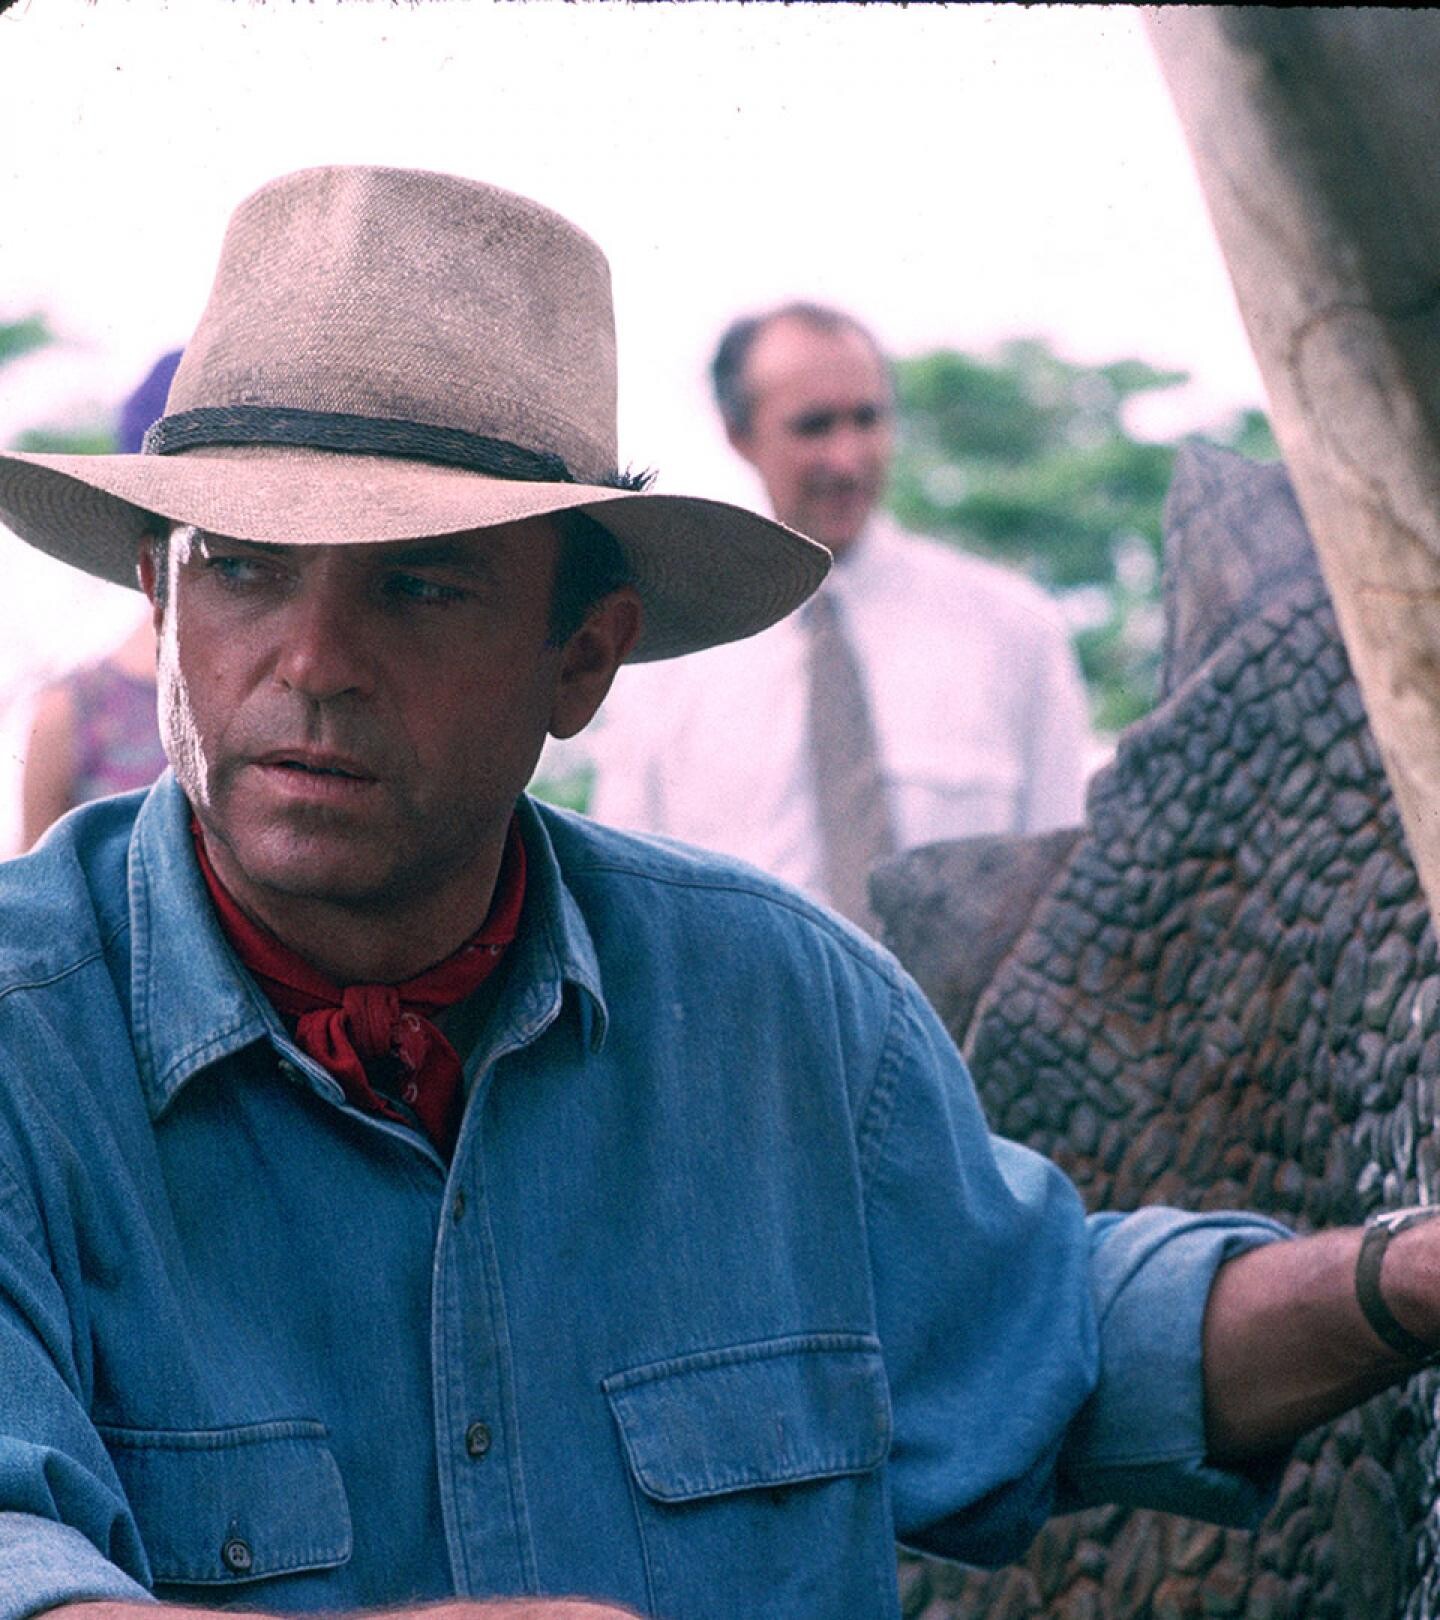 Alan Grant / Jurassic Park / First Realistic Character.